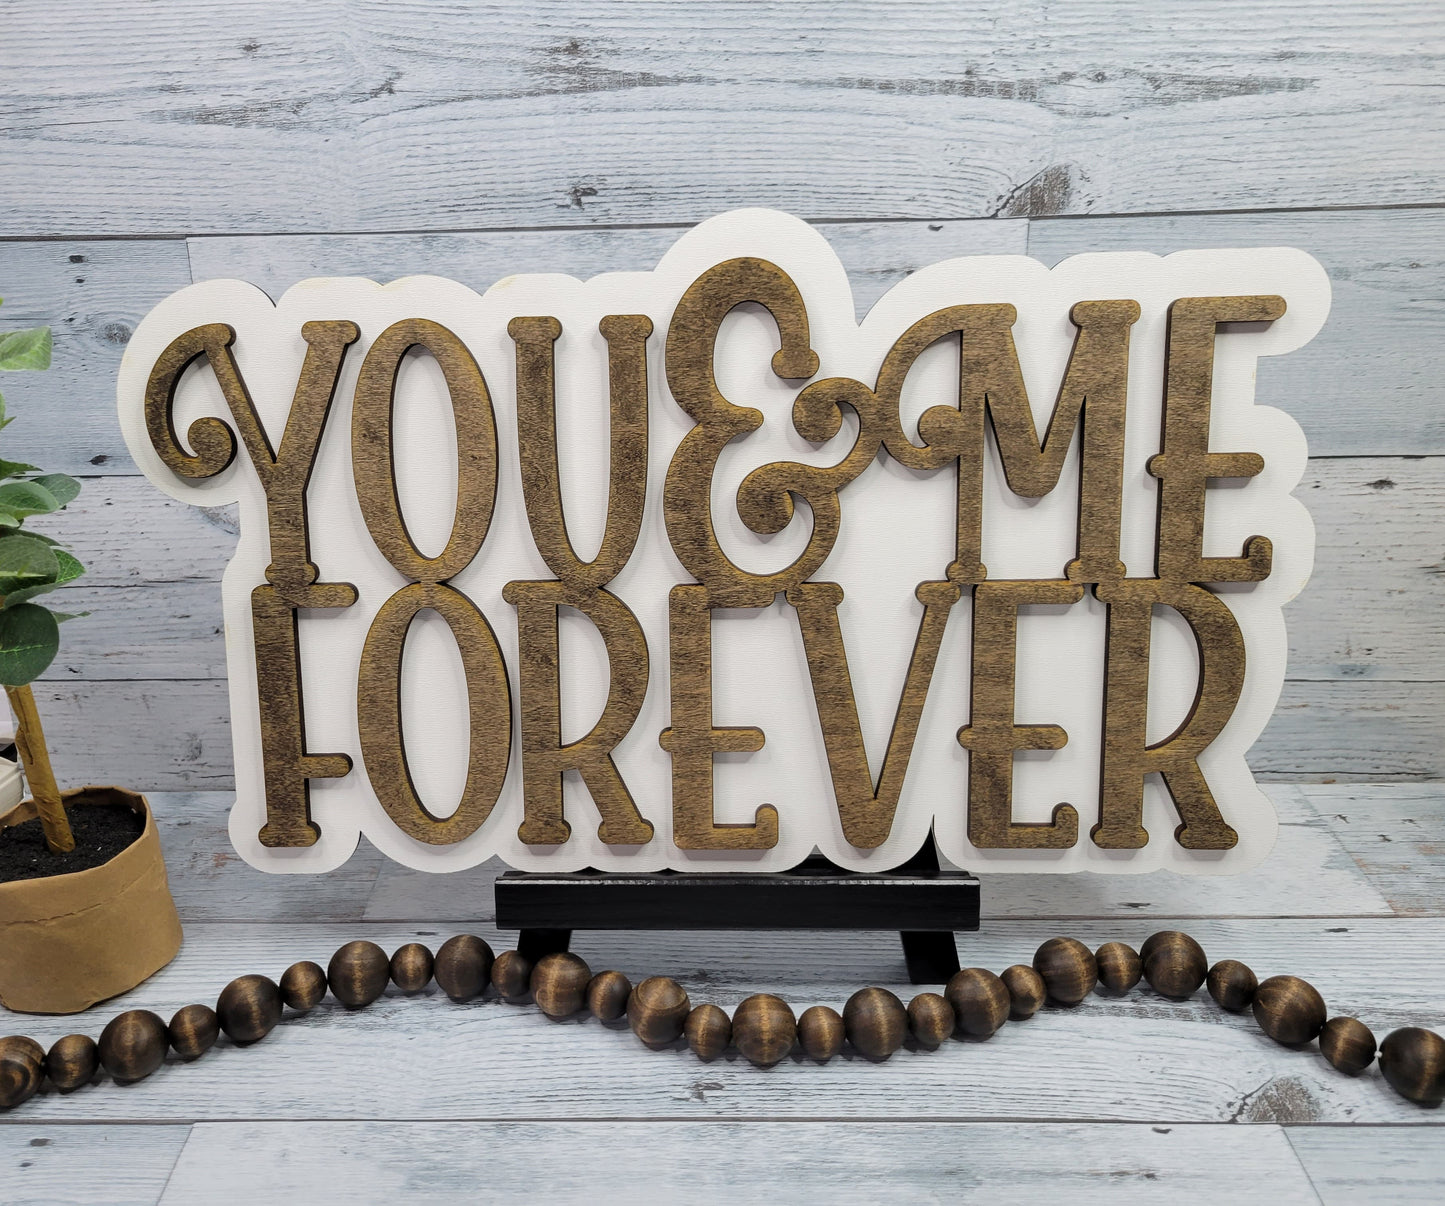 You & Me Forever Layered SVG Laser Ready File Glowforge